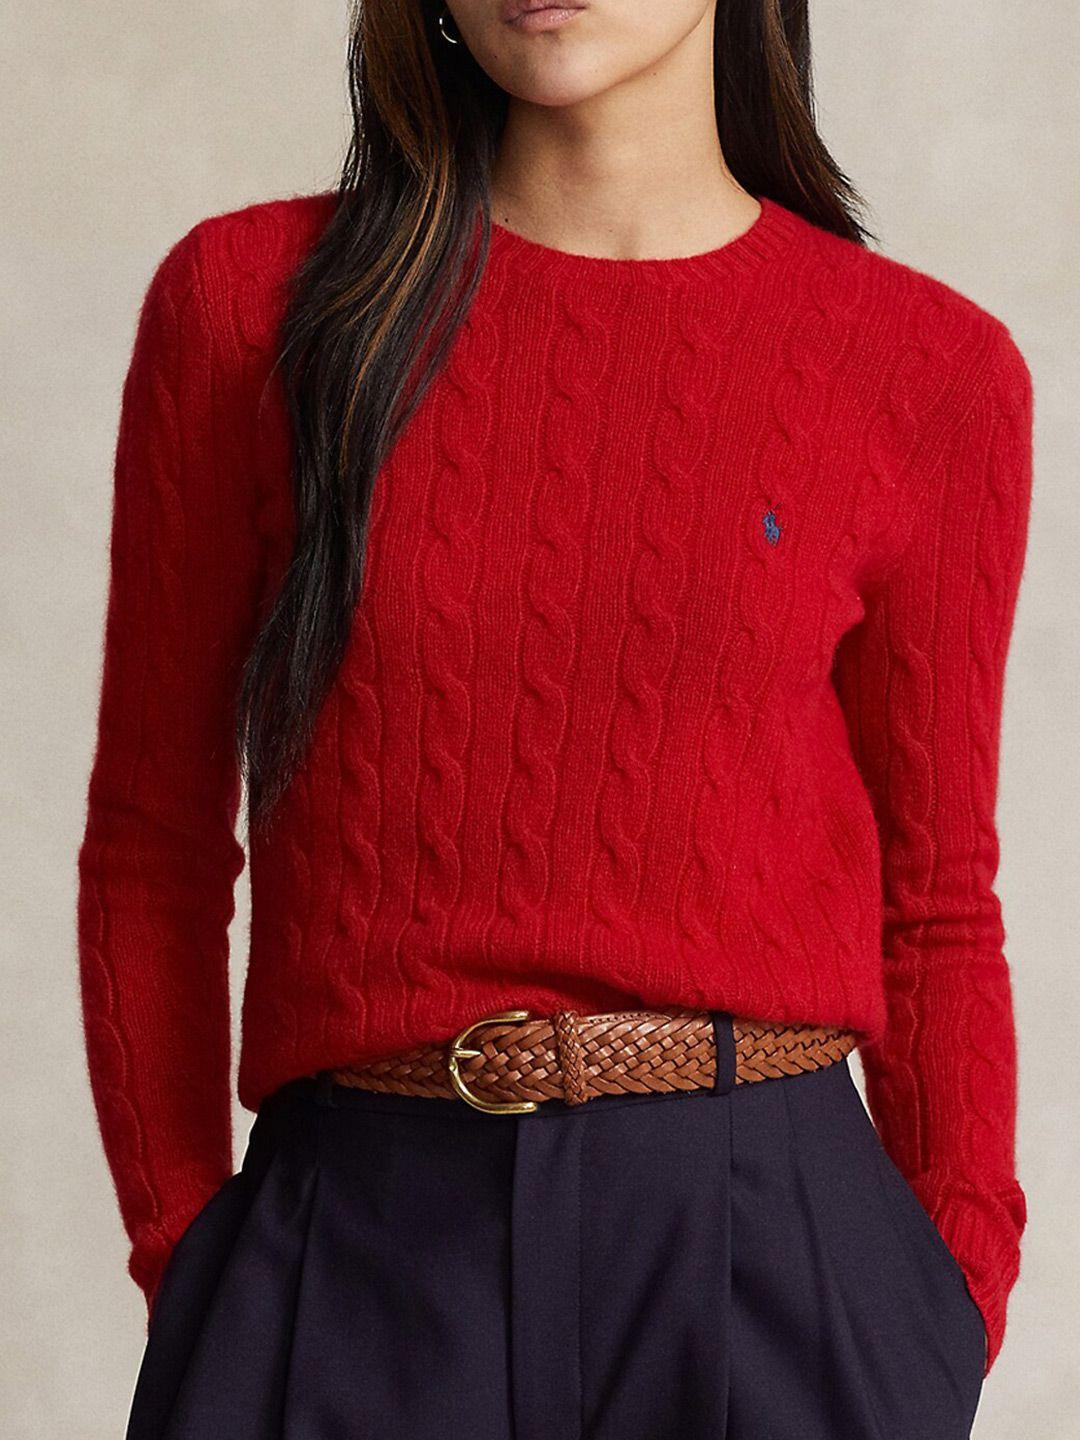 polo ralph lauren cable-knit round neck sweaters